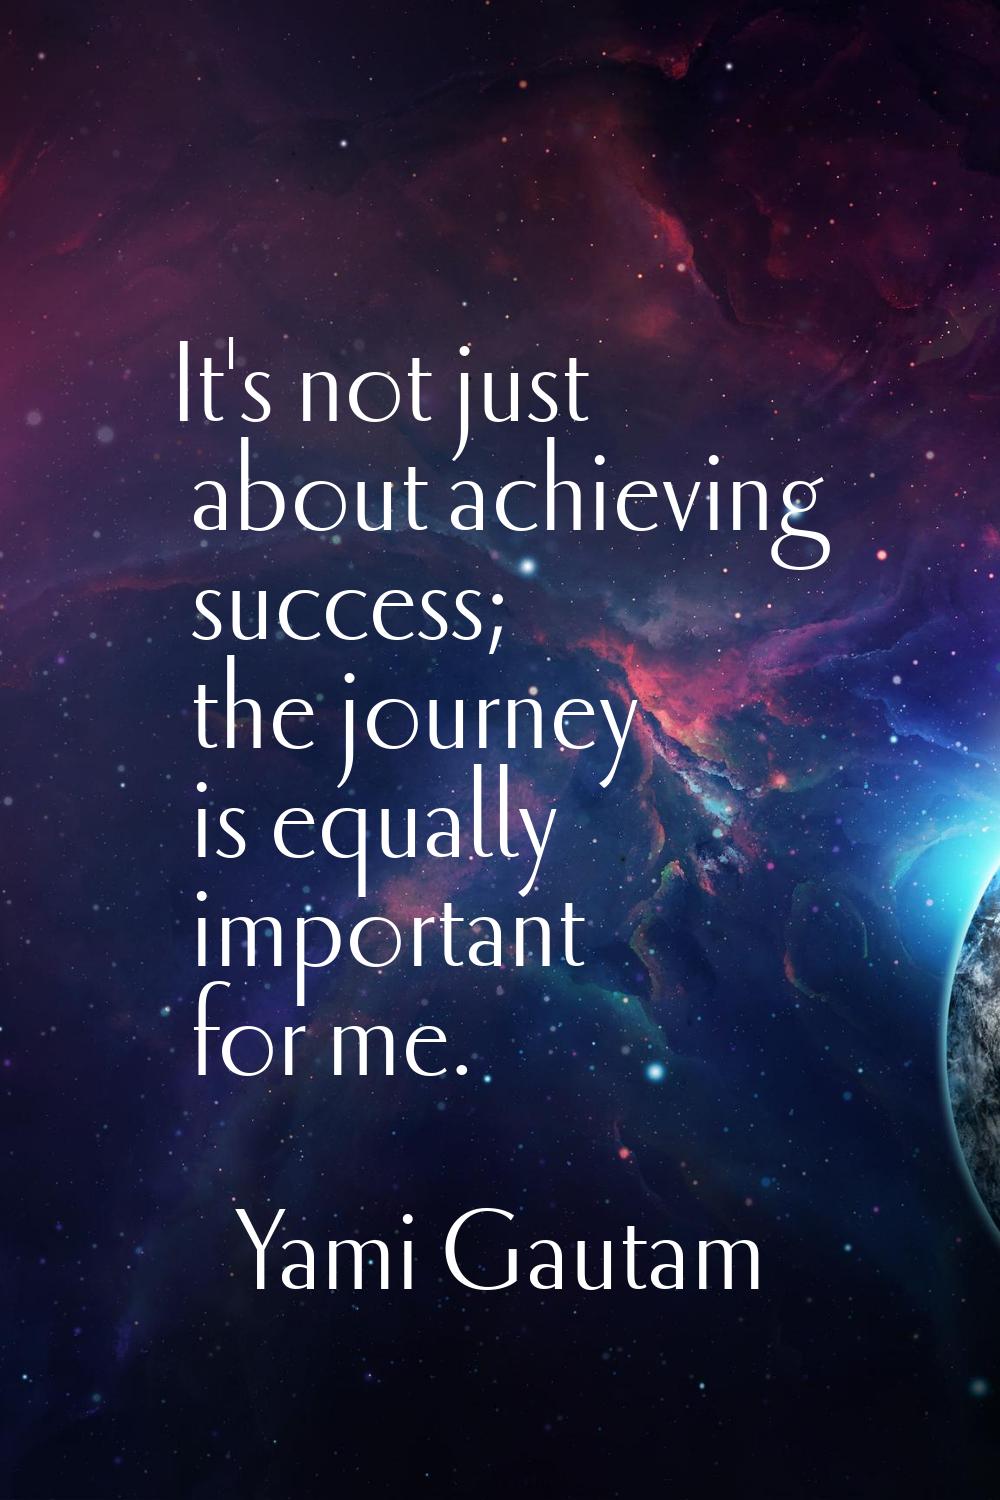 It's not just about achieving success; the journey is equally important for me.